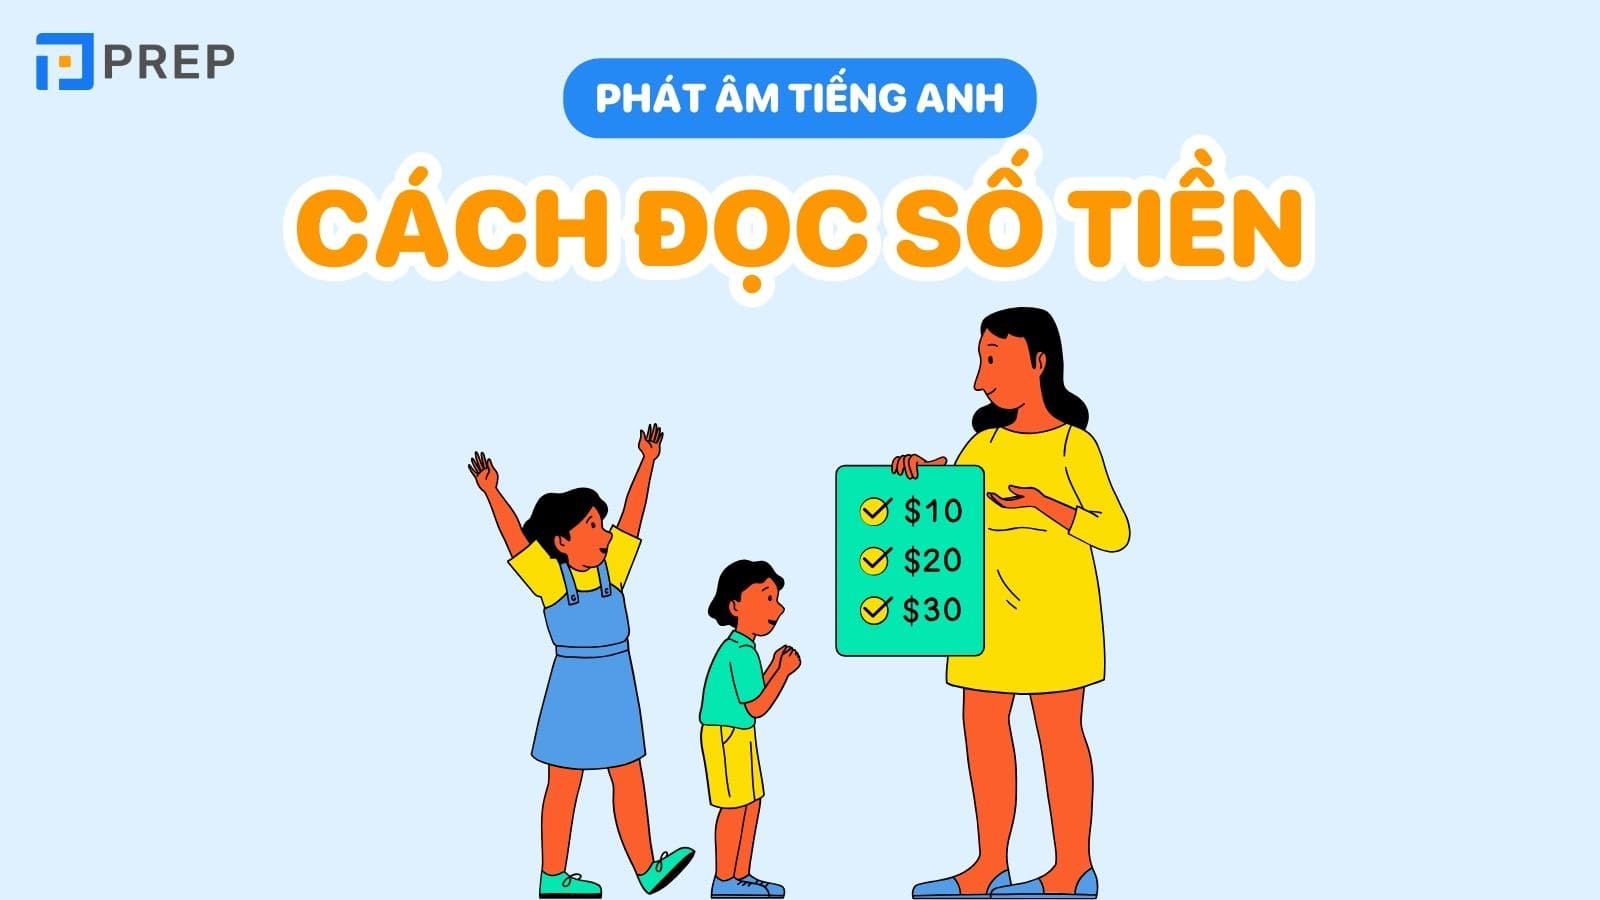 cach-doc-so-tien-trong-tieng-anh.jpg